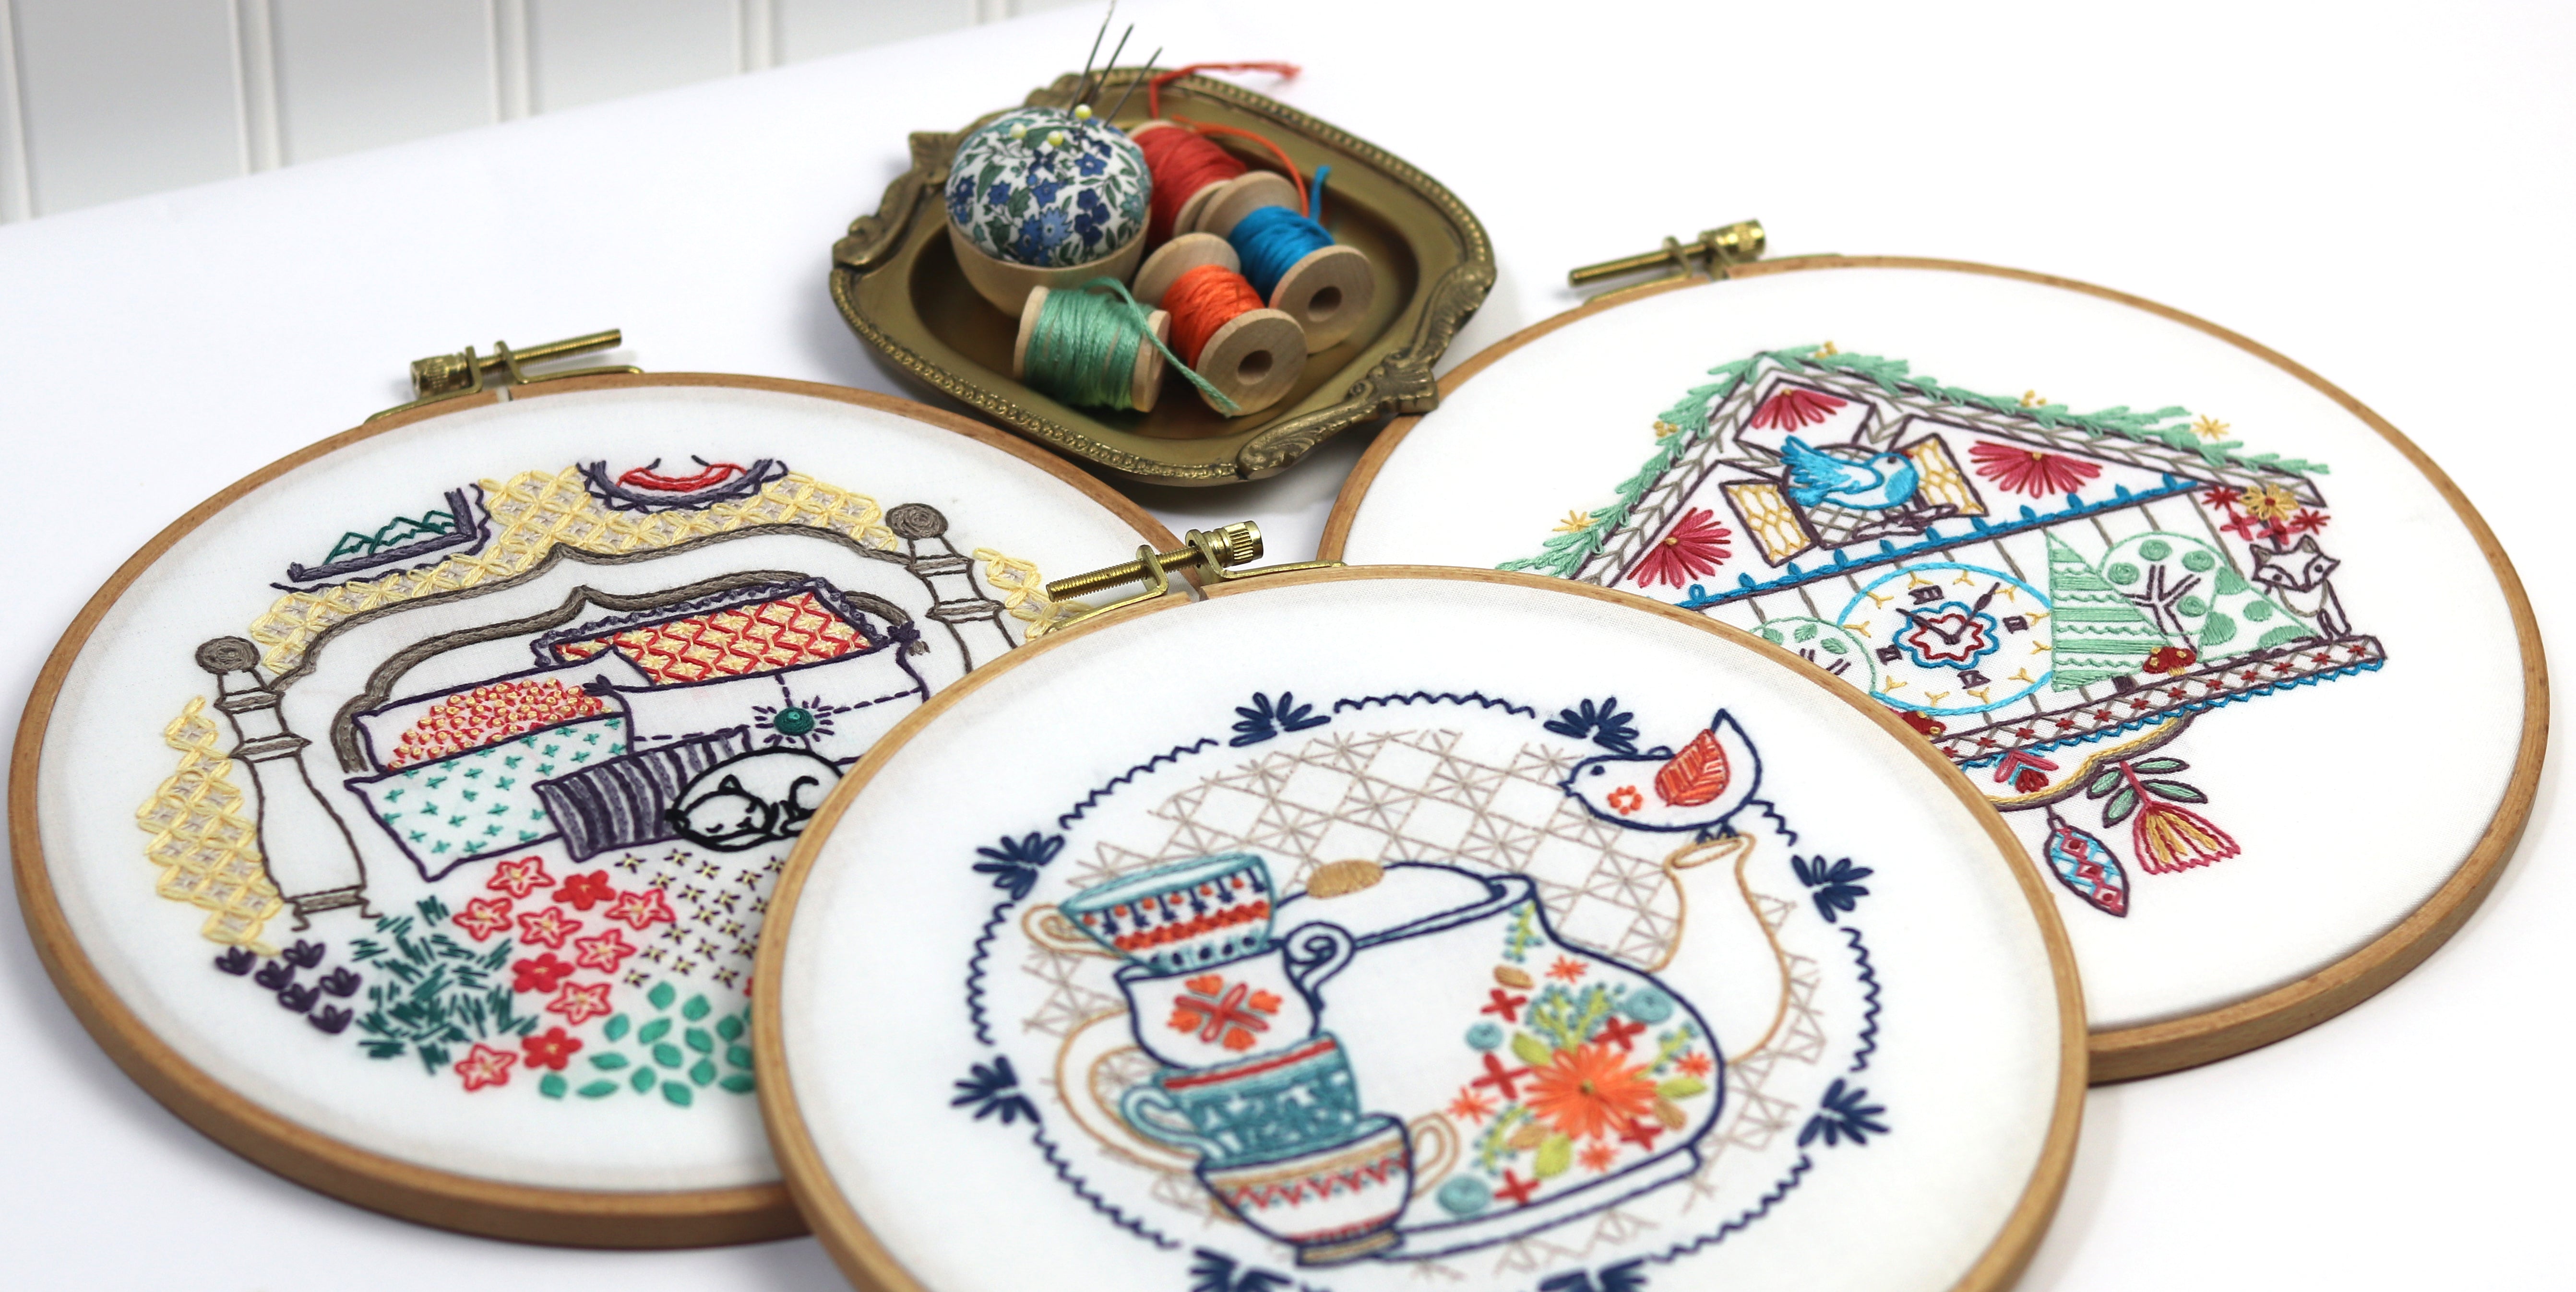 Embroidery Kit - Peacock - Gift & Gather